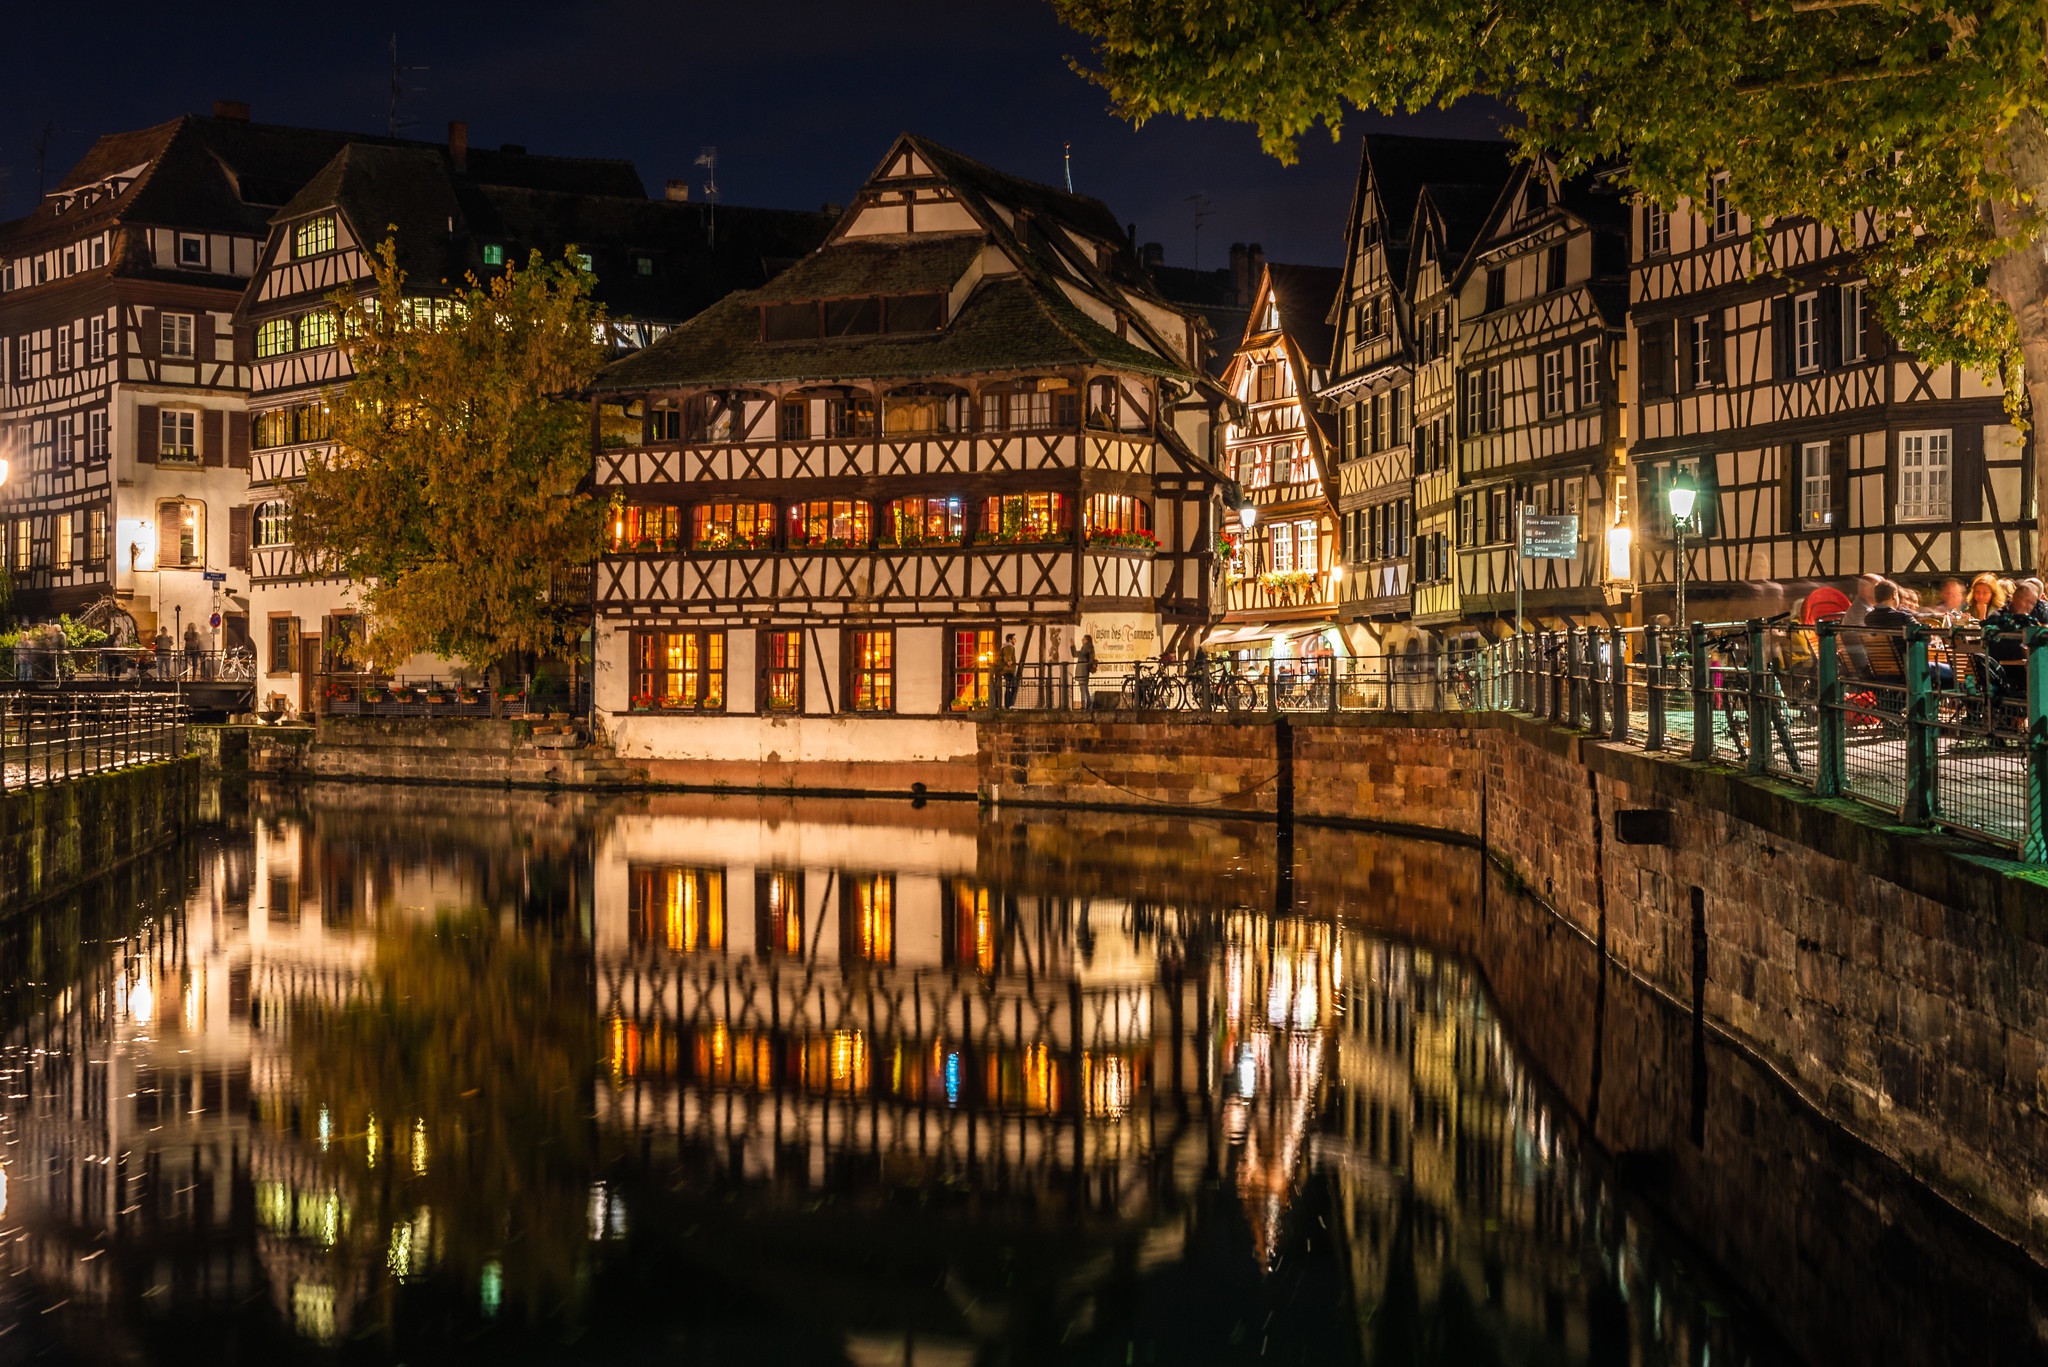 man made, strasbourg, building, canal, france, house, reflection, cities